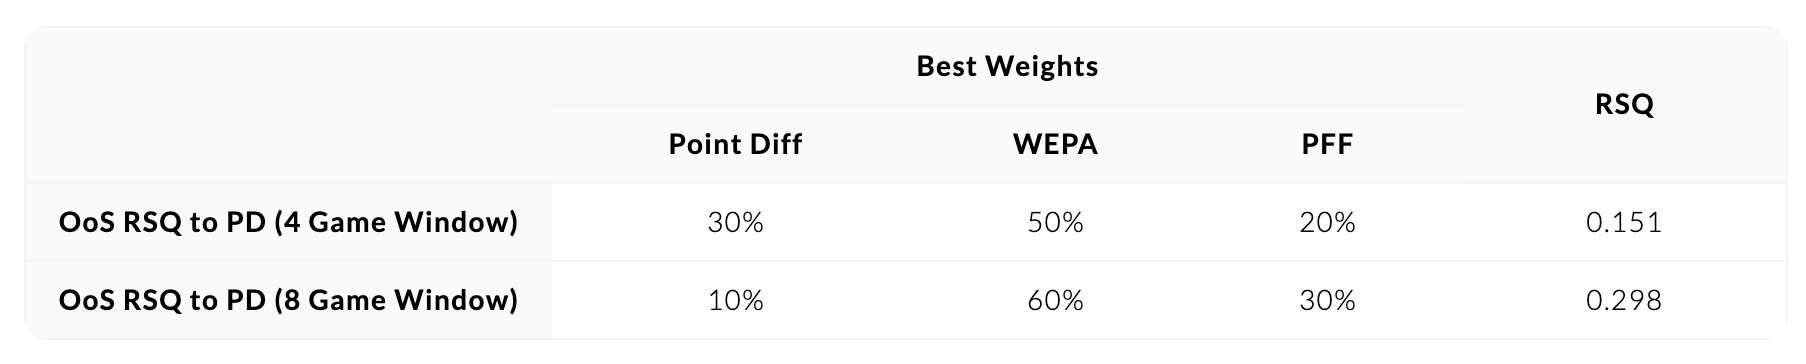 optimized-game-grade-weights